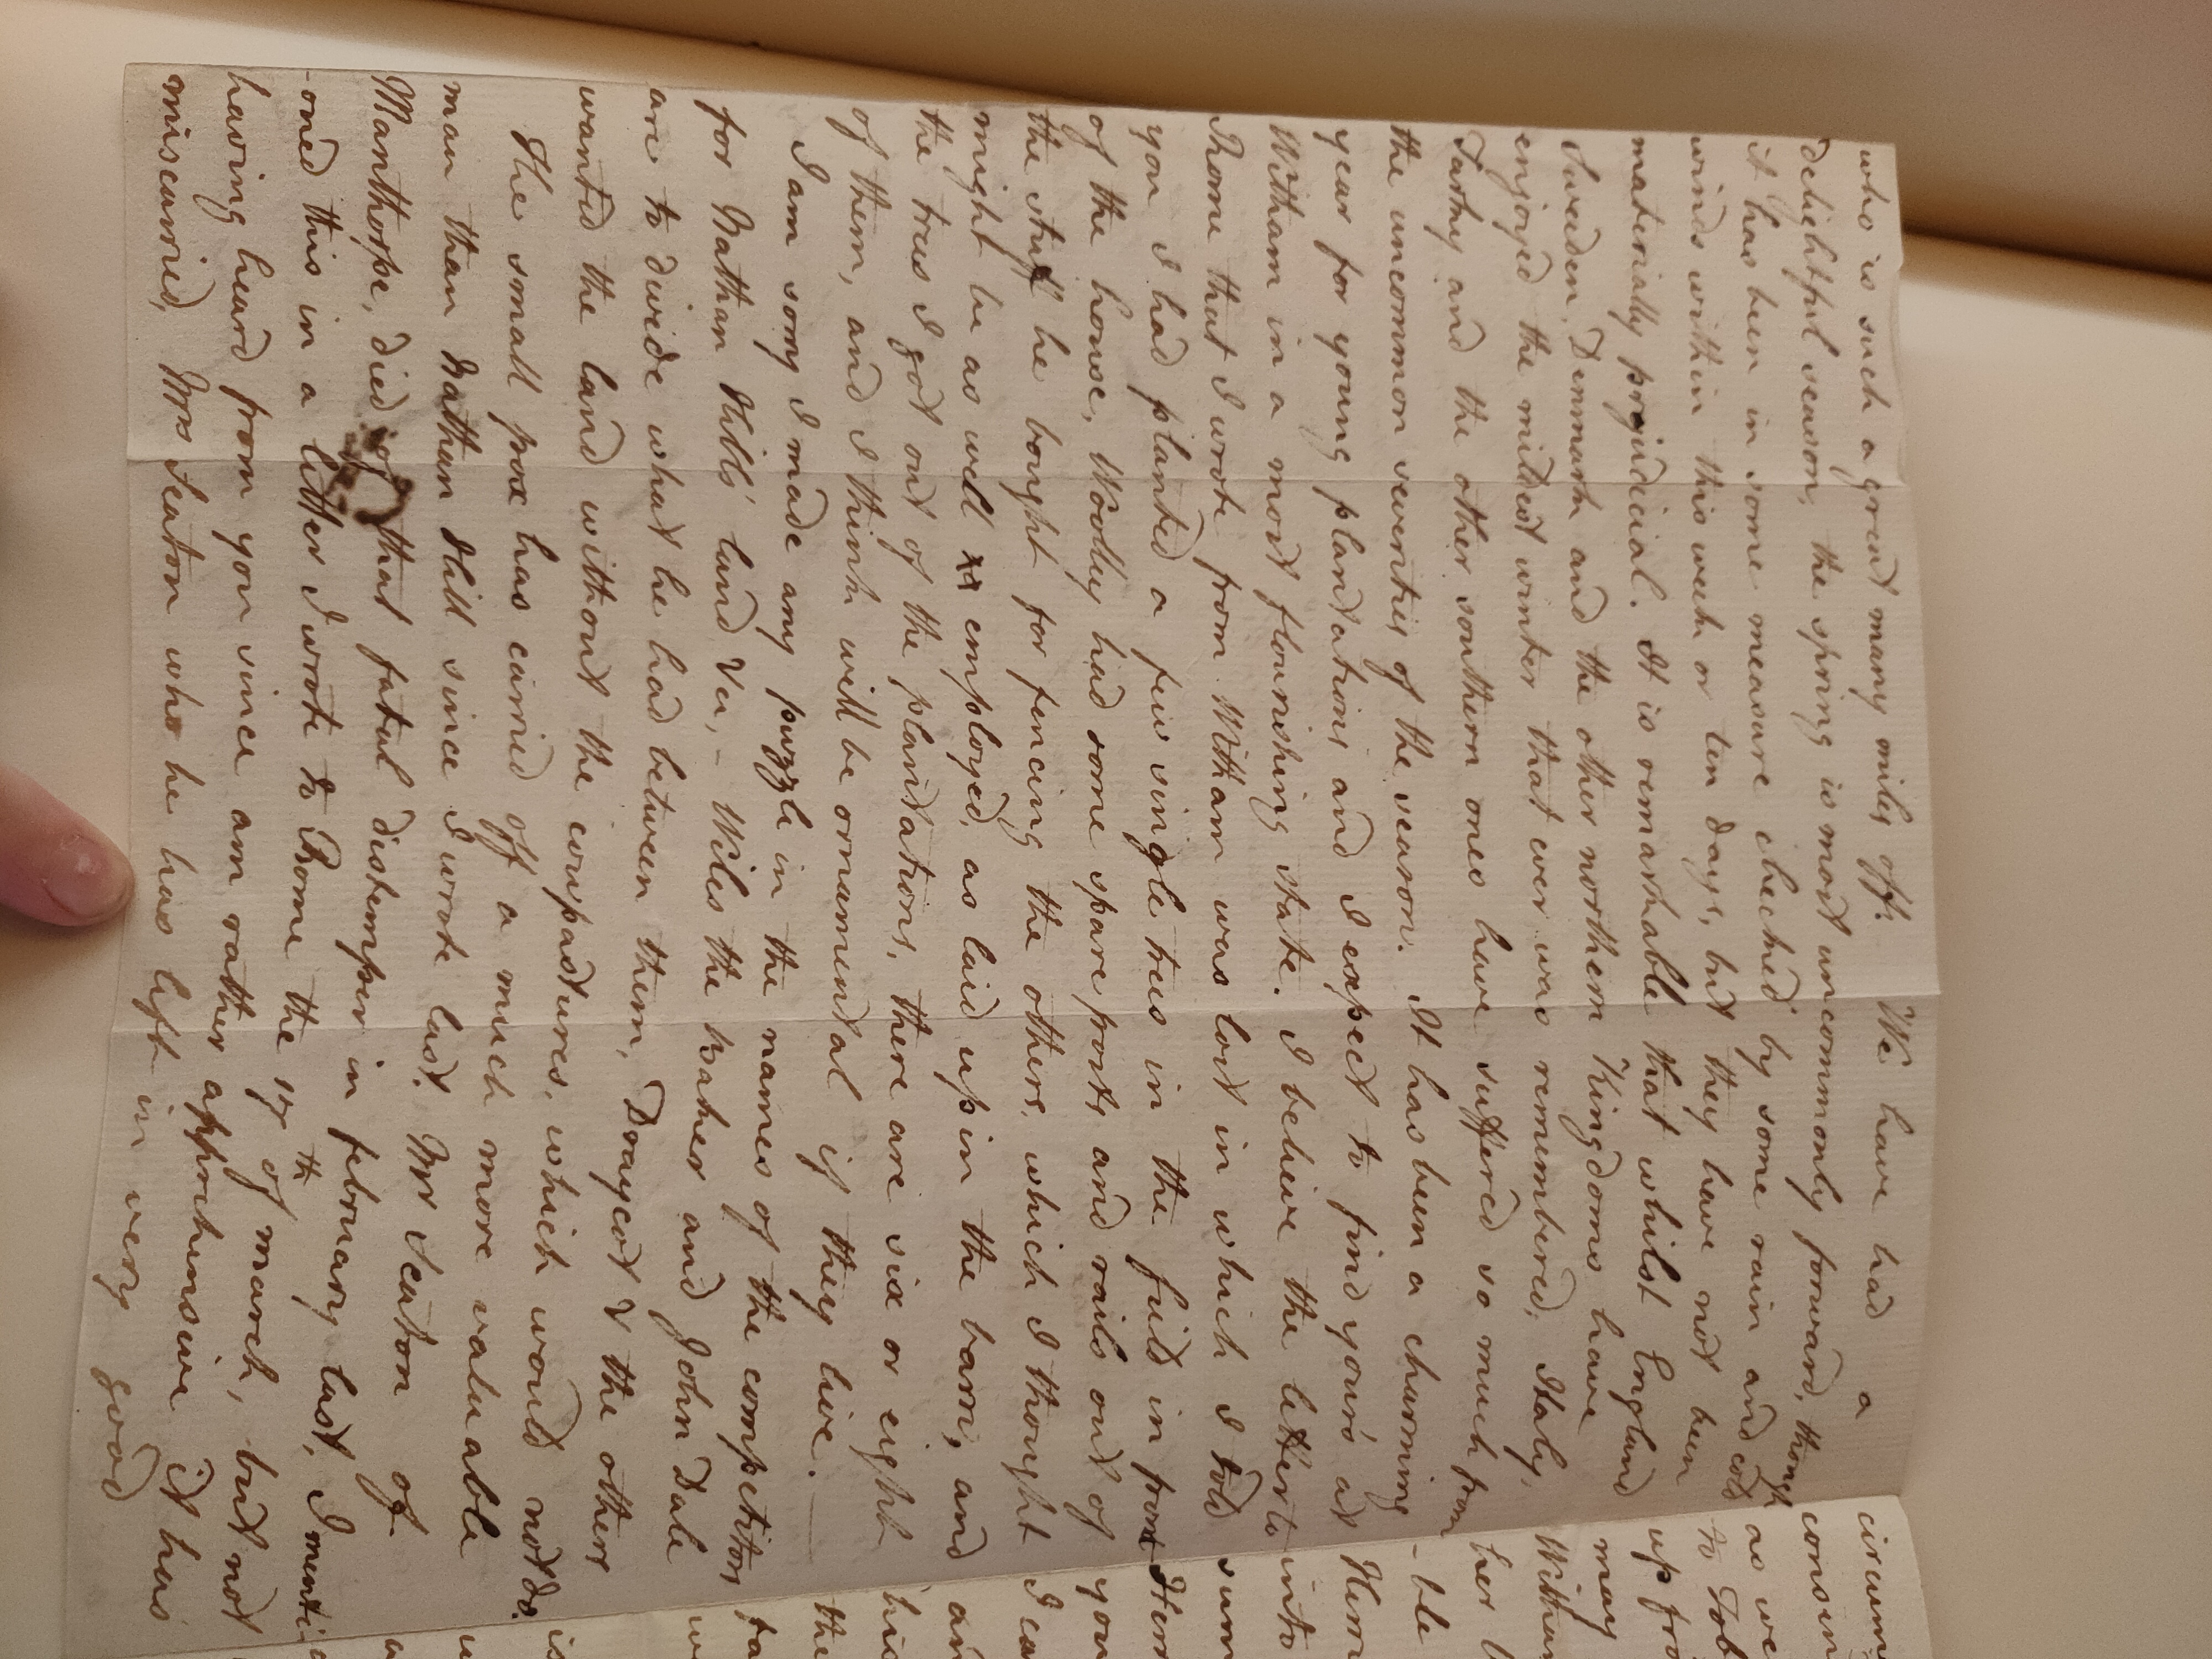 Image #2 of letter: Robert Augustus Johnson to George William Johnson, 3 May 1779